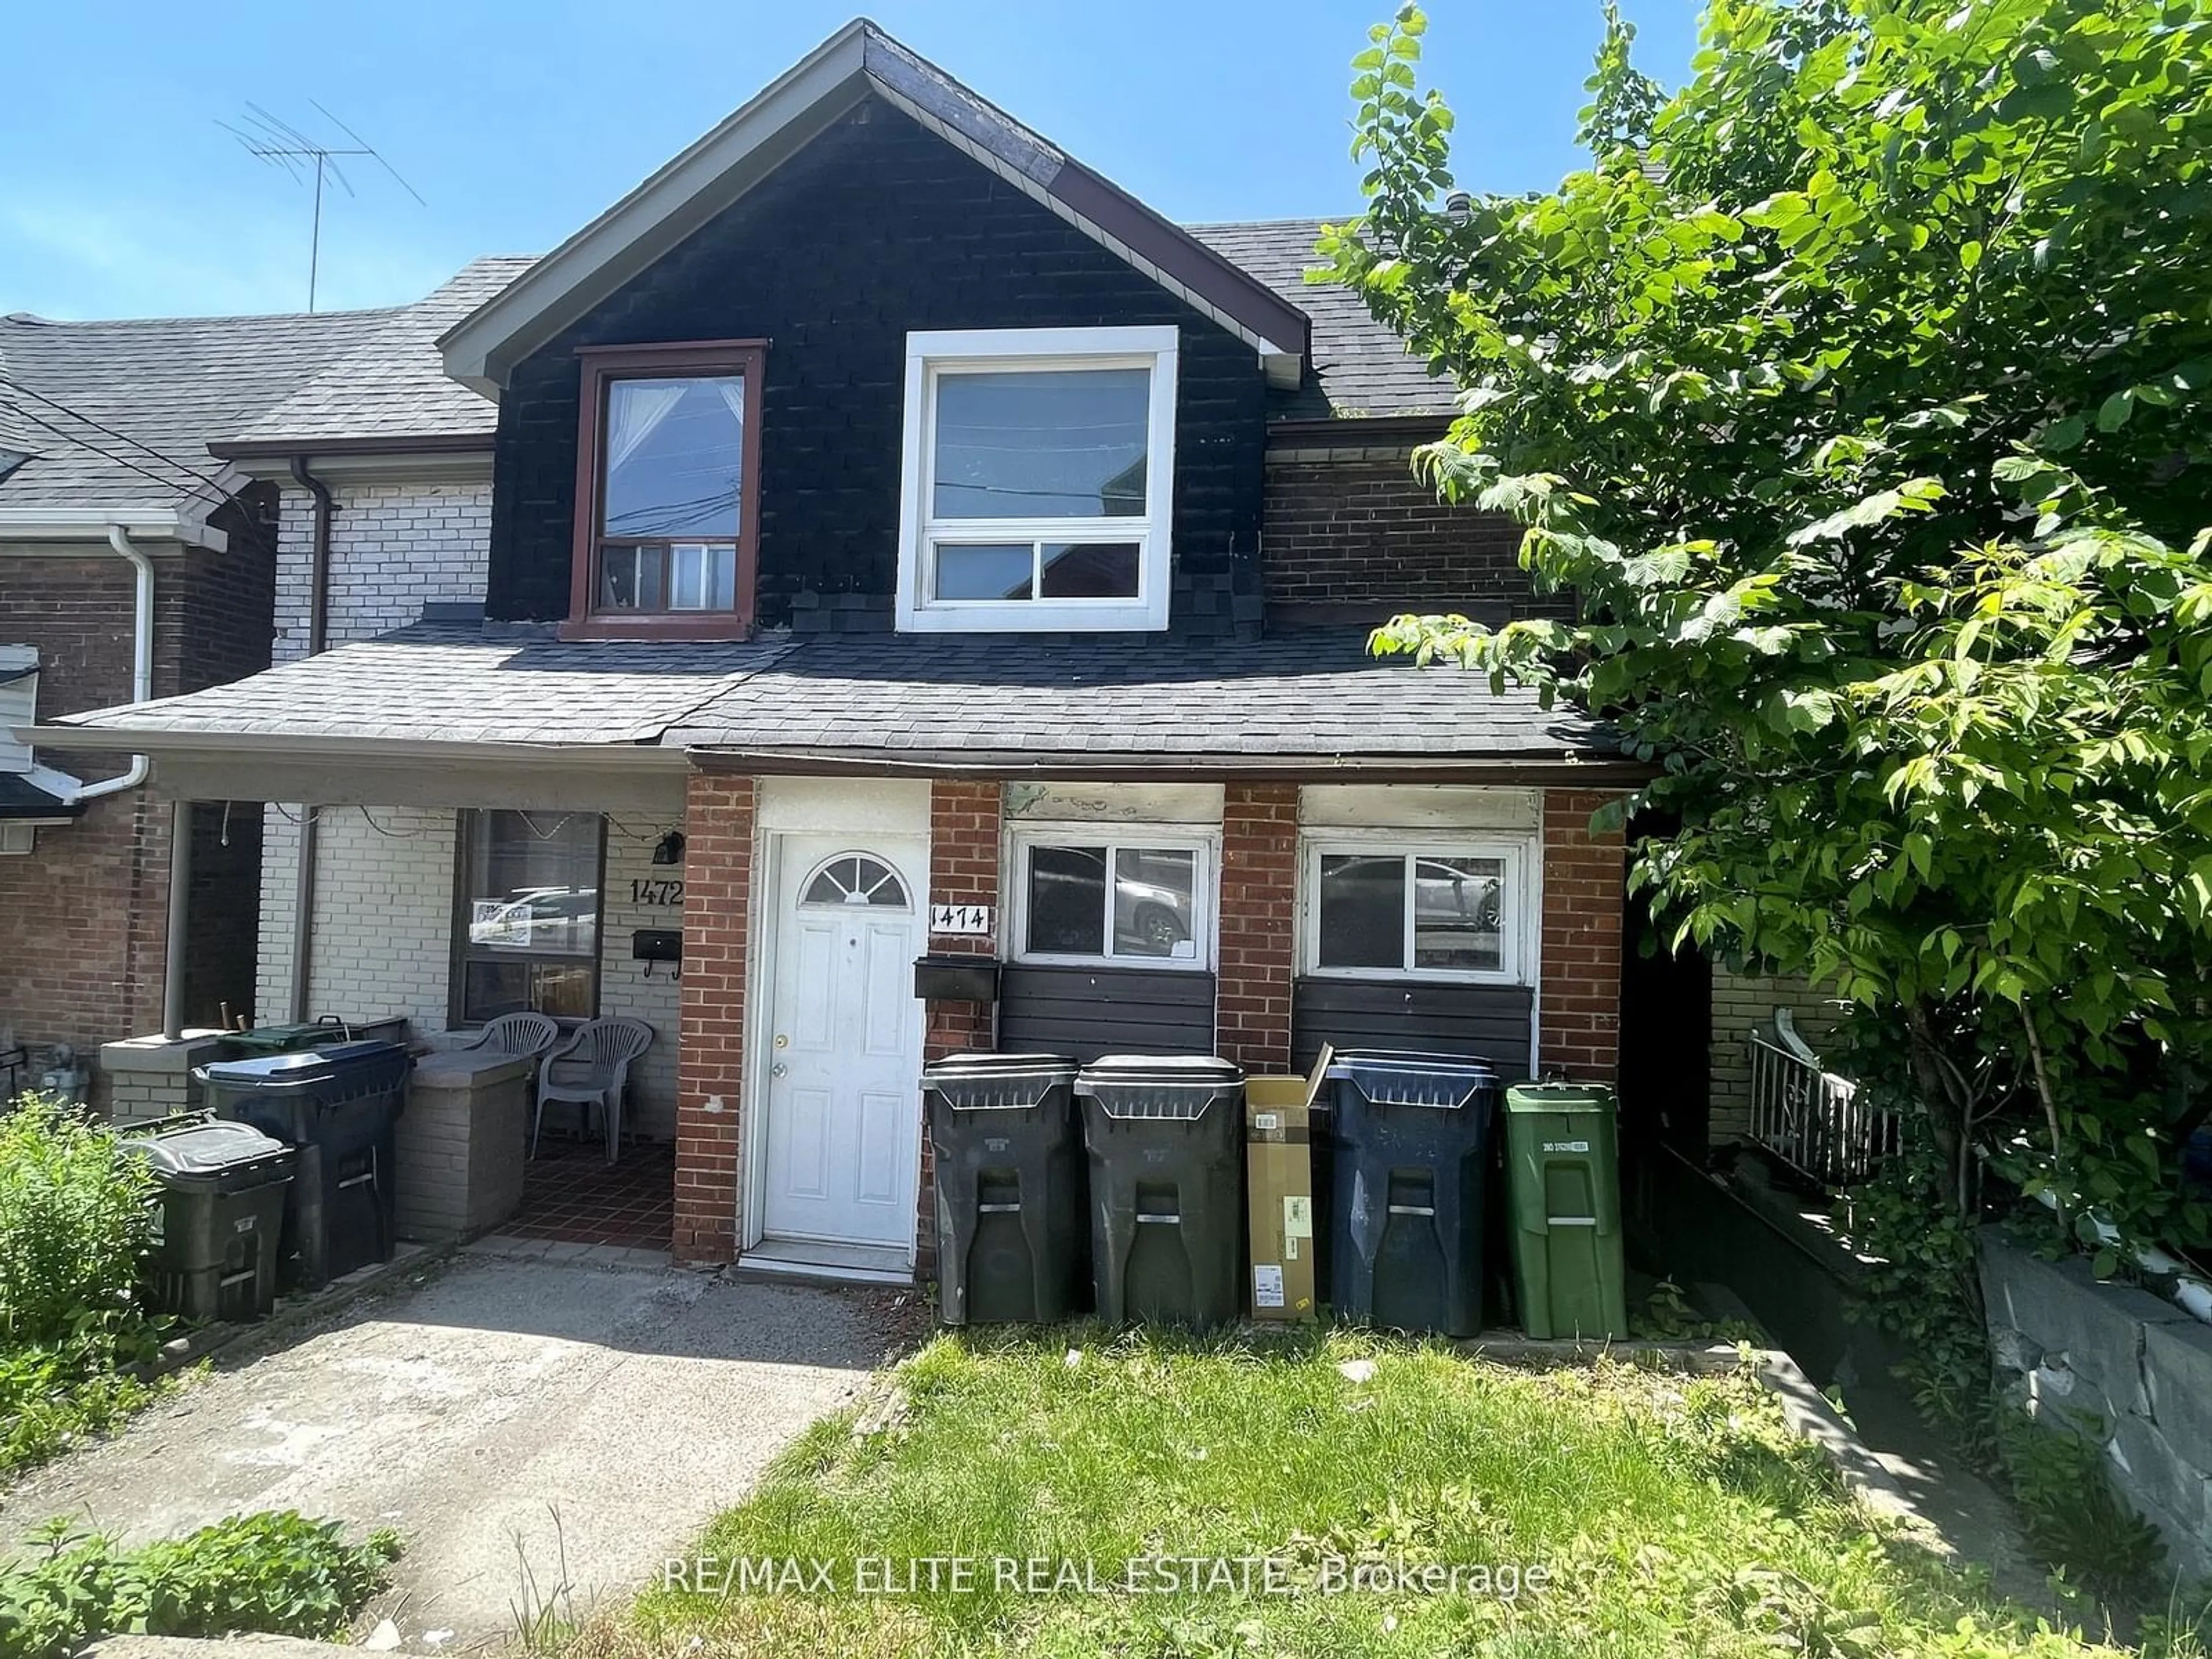 Outside view for 1474 Dufferin St, Toronto Ontario M6H 3L3